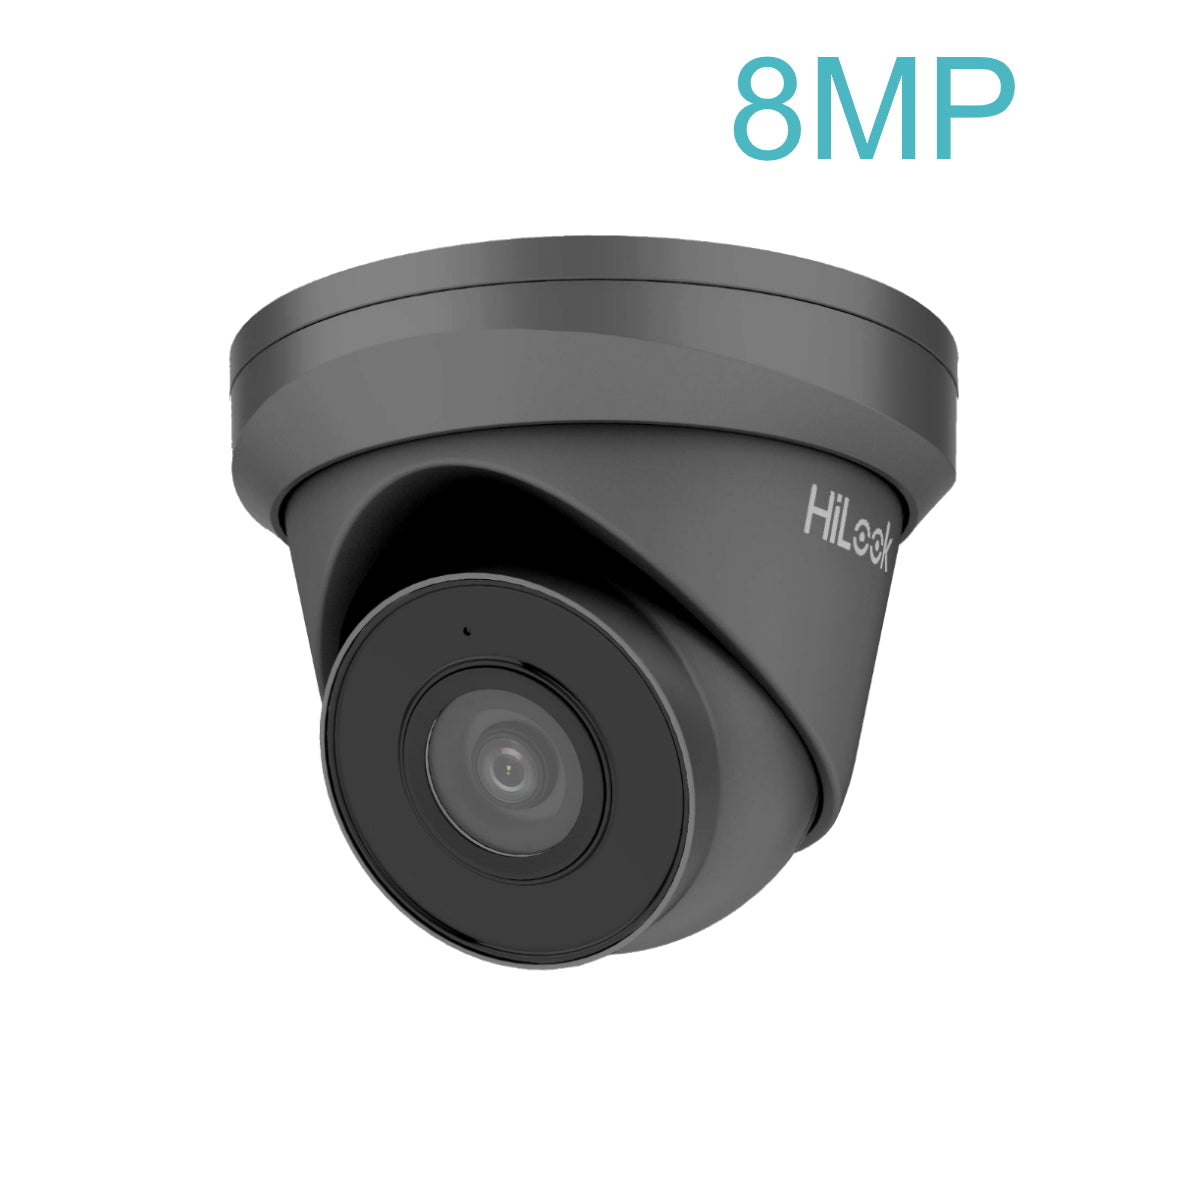 IPC-T280H-MUF 2.8mm HiLook 8MP 4k ultra HD IP POE network turret camera, 30m IR, built-in microphone in white or grey